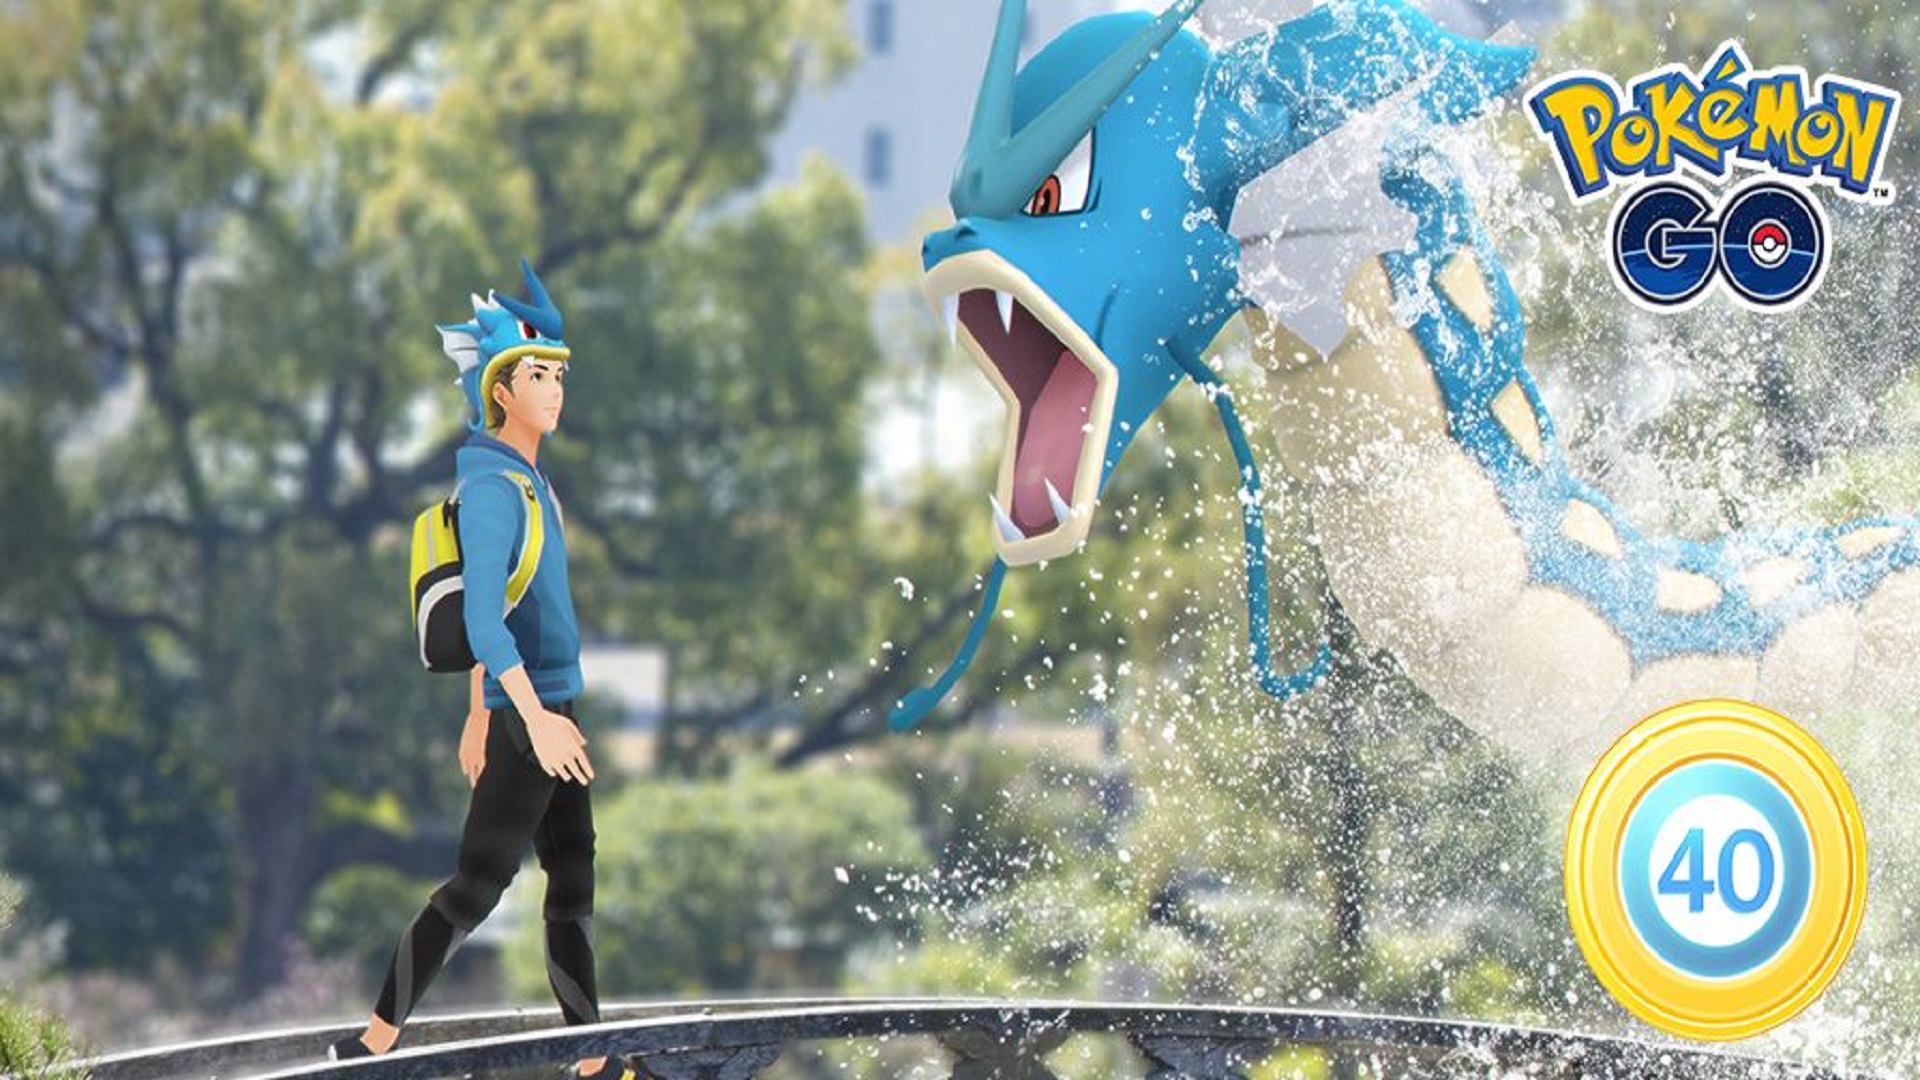 Pokemon Go Beyond update adds Gen 6 Pokemon raises level cap to 50 introduces seasons and more